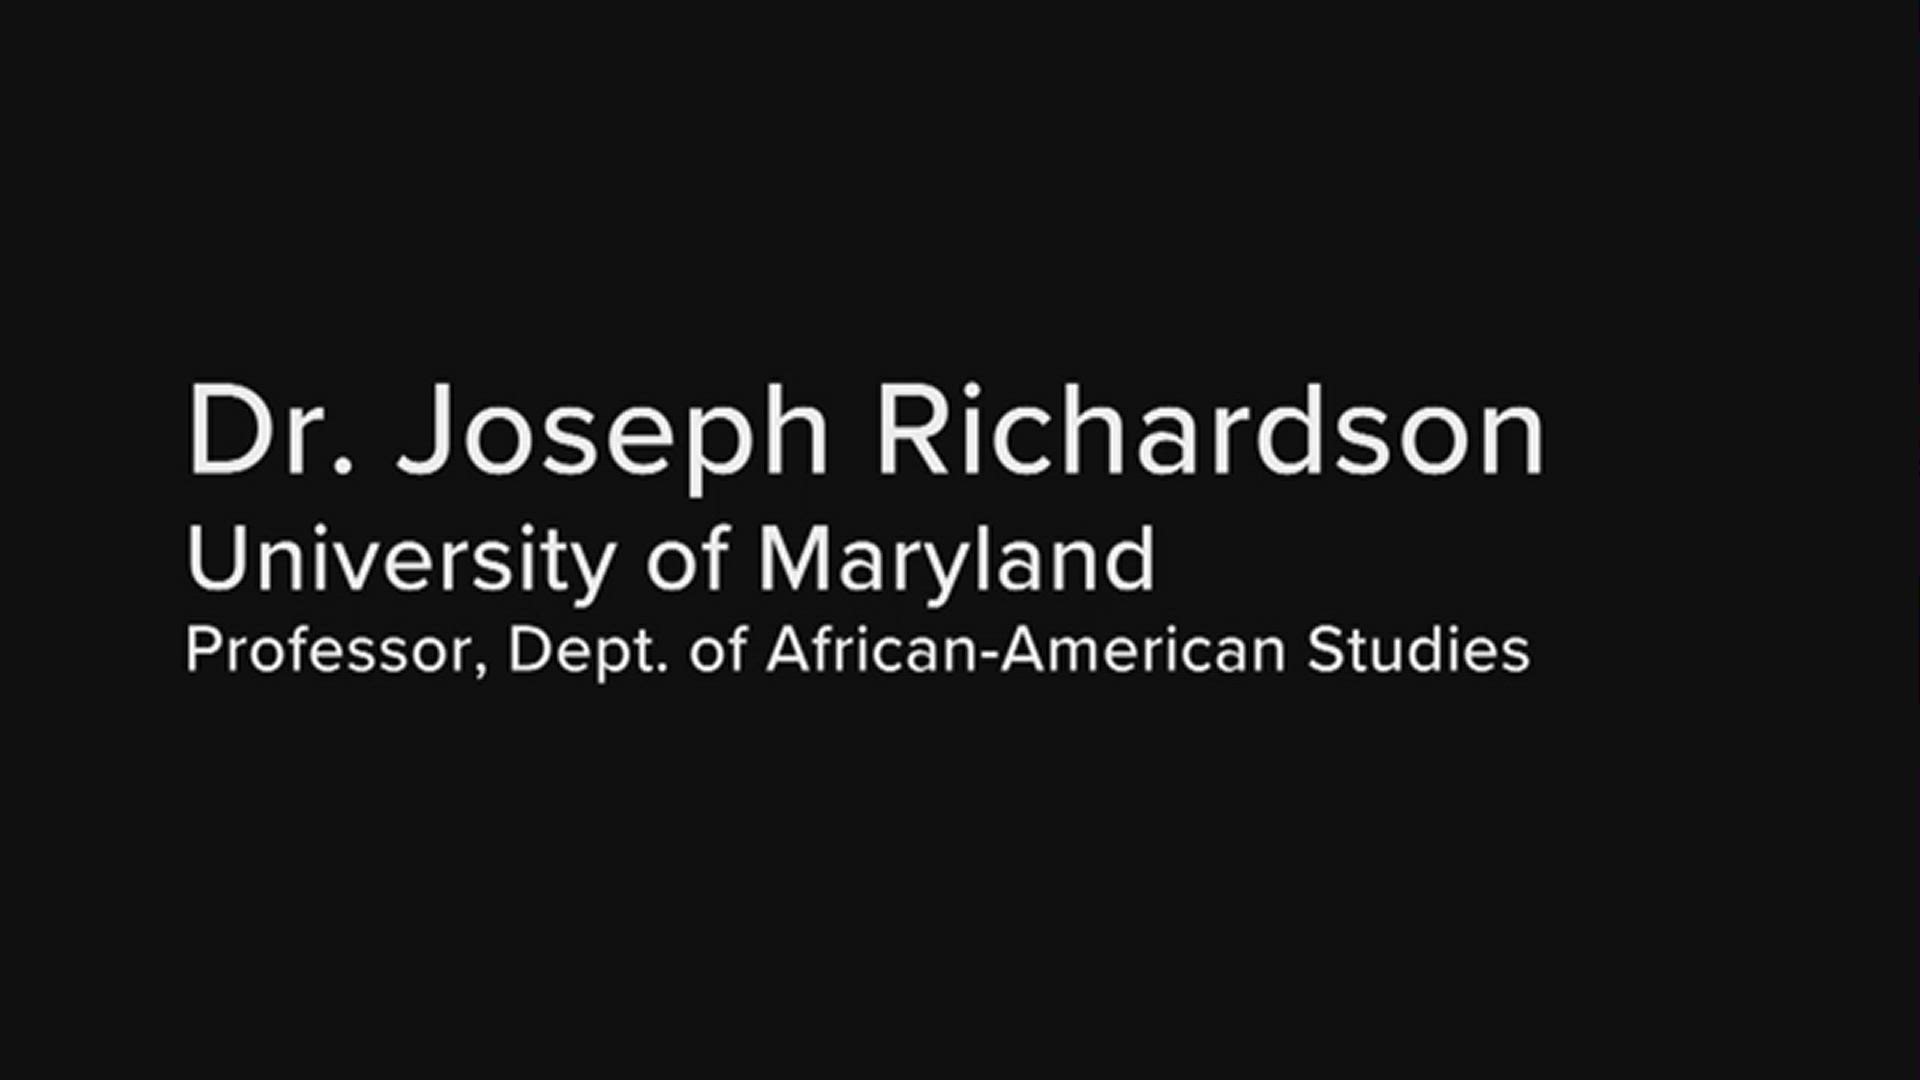 Dr. Joseph Richardson, professor at the University of Maryland, discusses the mental trauma gun violence can leave on its victims and surrounding communities.